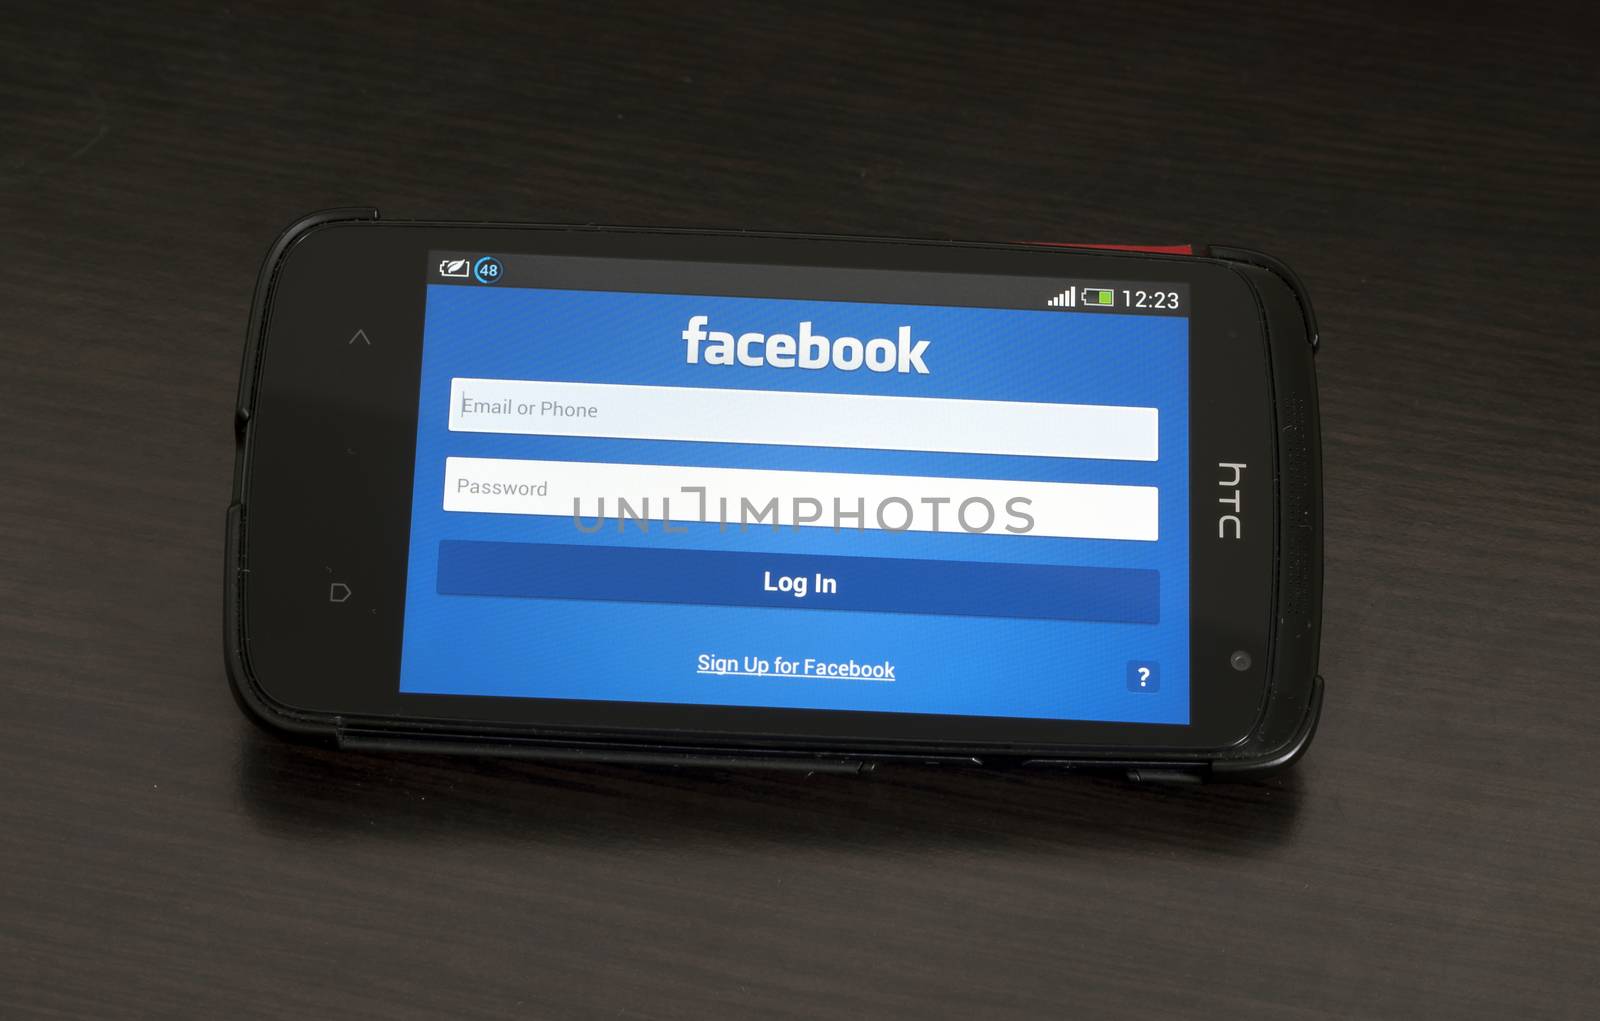 Bucharest, Romania - January 28, 2014: Photo of a HTC Desire device, showing the Facebook homepage of the Android app featuring the Log In formular.